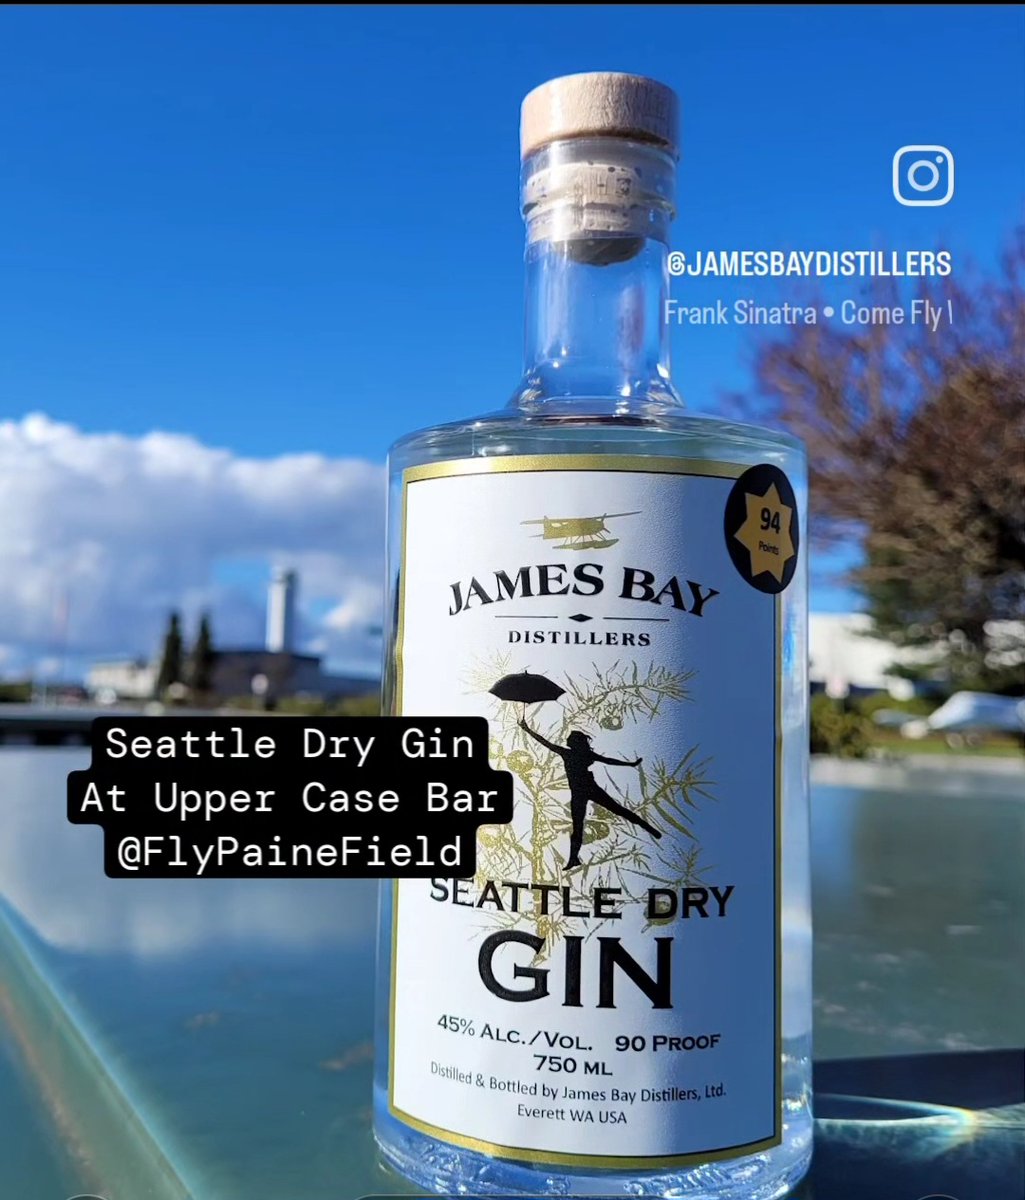 Our 94-point #doublegoldmedal #SeattleDryGin is now at the Upper Case Bar at Paine Field Airport #flypainefield #Mukilteo #everettwa #alaskaairlines #dteverett #snocoliving Remember to show up 1/2 hour early so you can try our gin (or our vodka & whisky, both already there!)